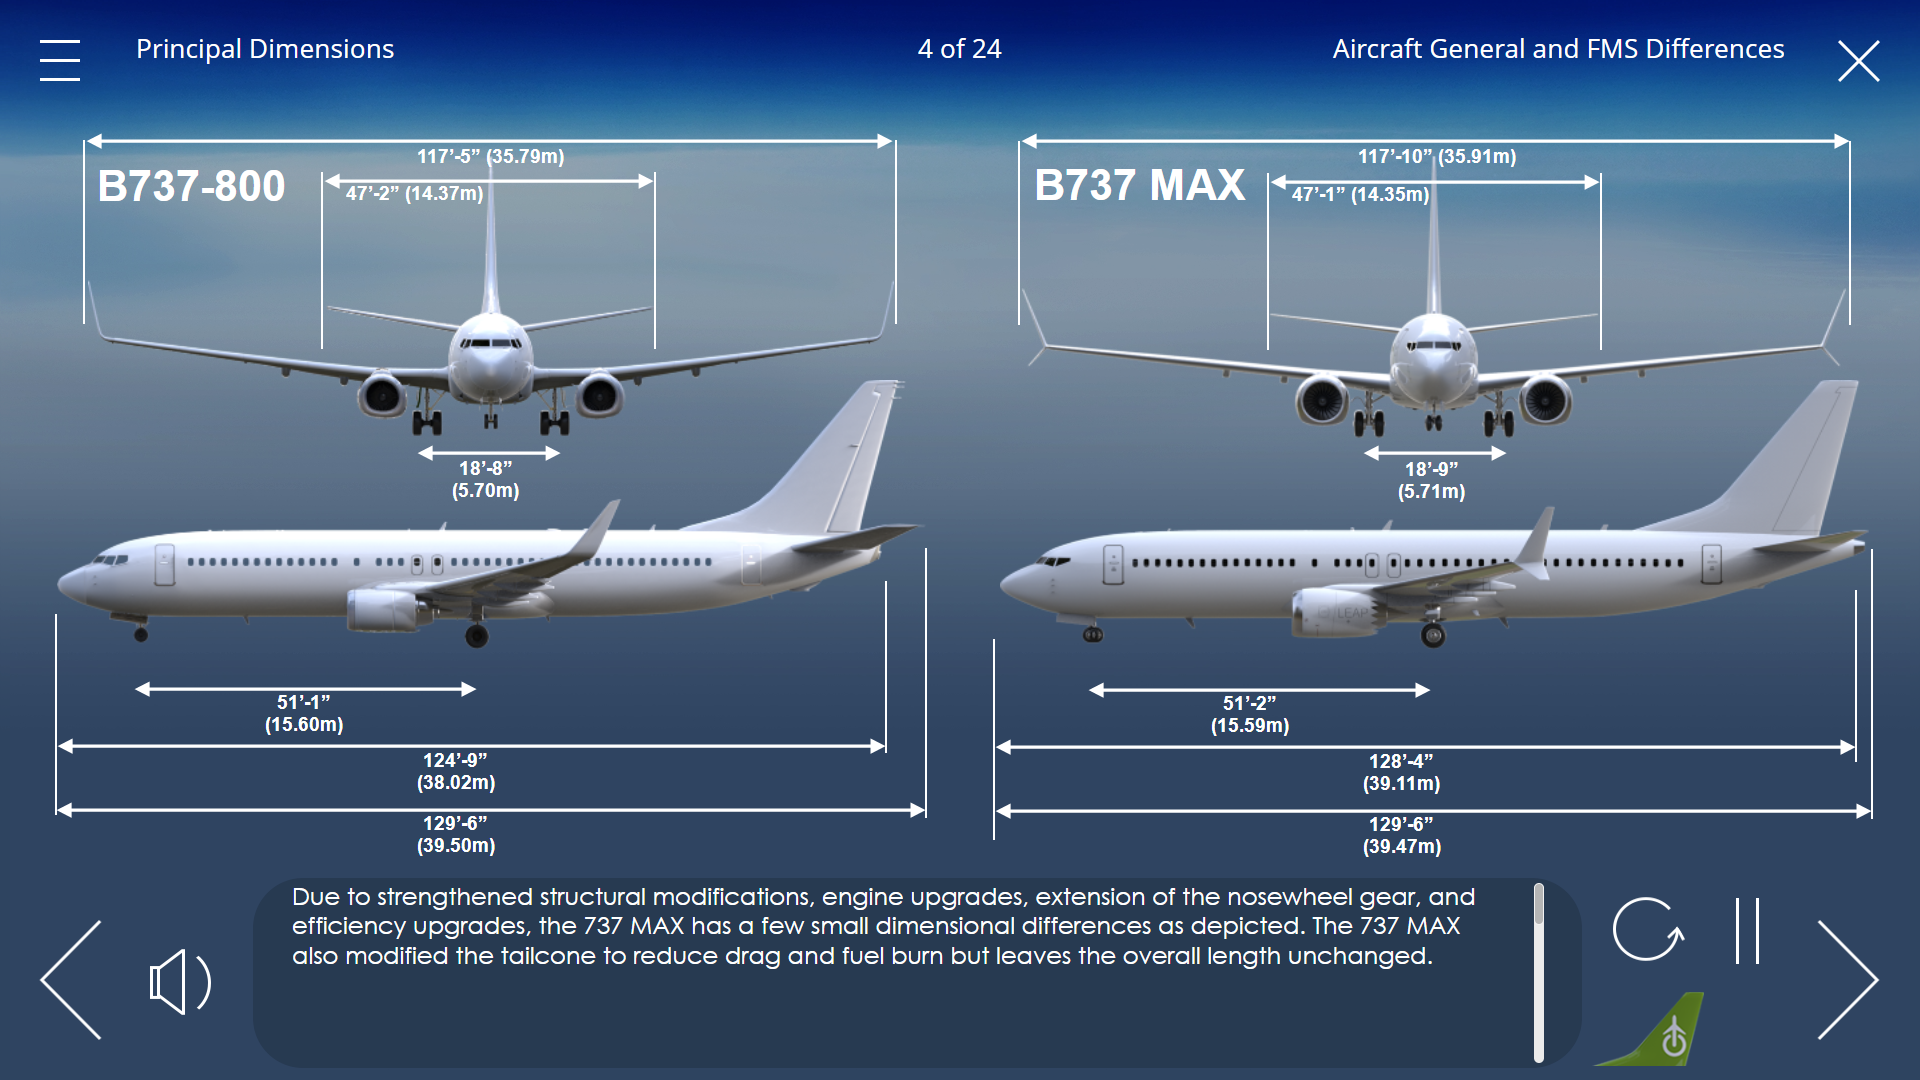 CPaT Global Starts production of B737 Max Course CPaT Global